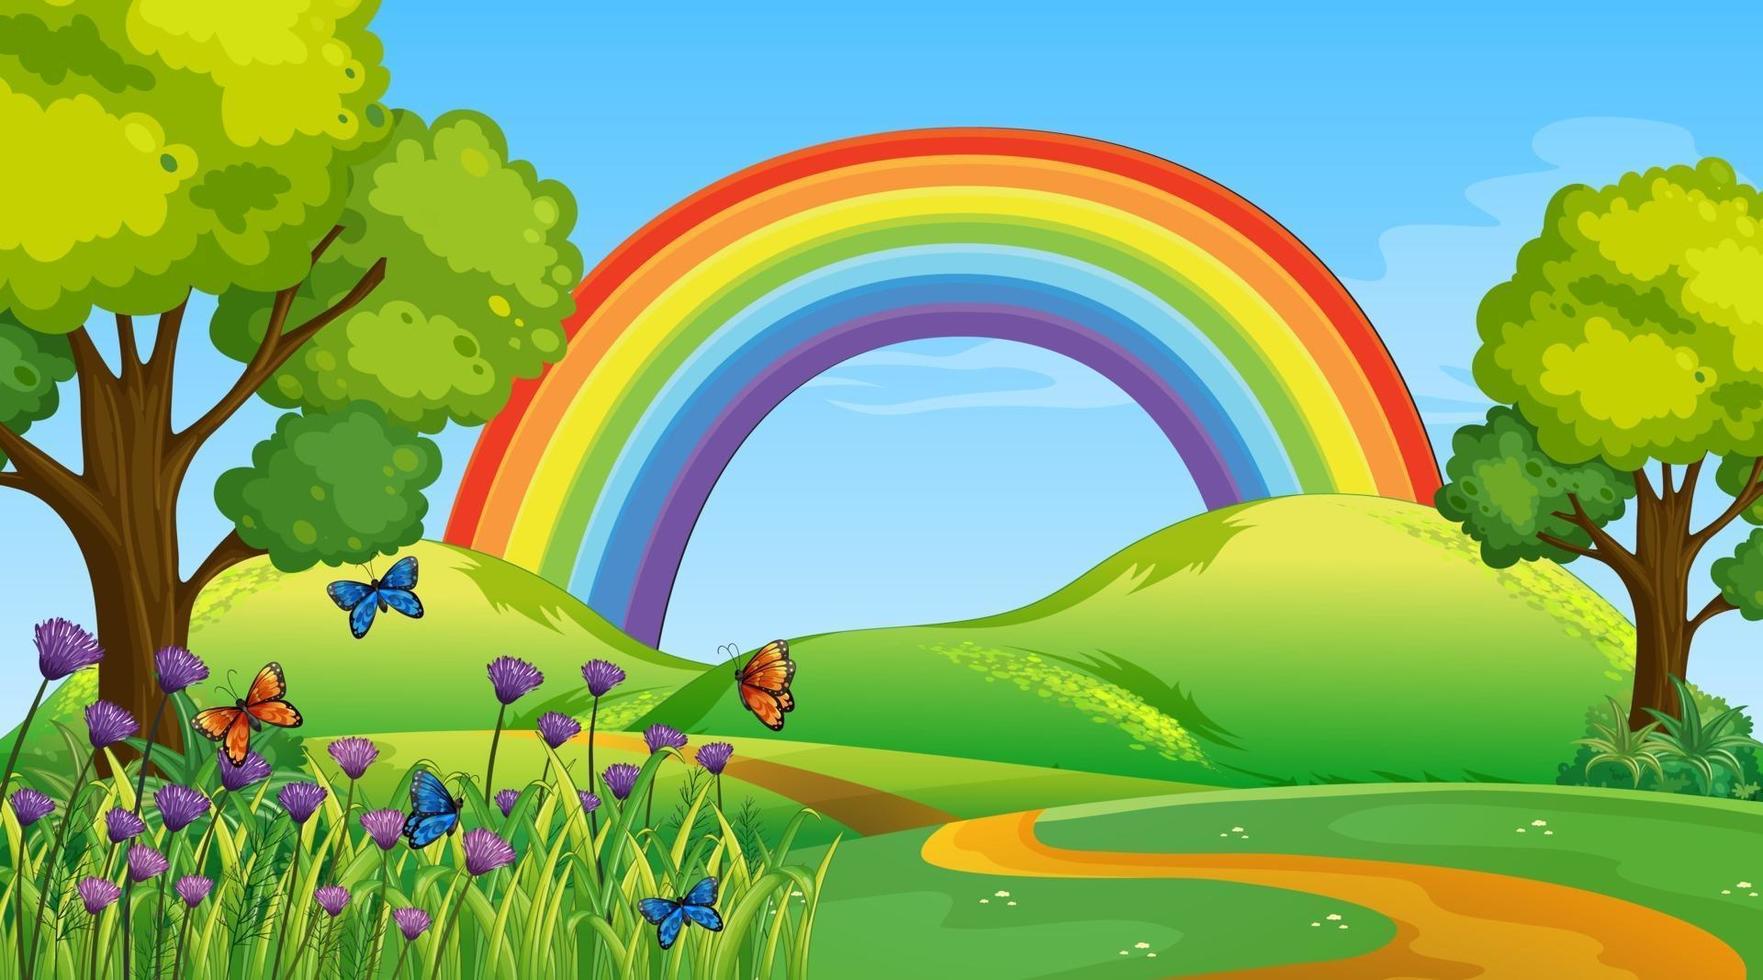 Nature park scene background with rainbow in the sky vector